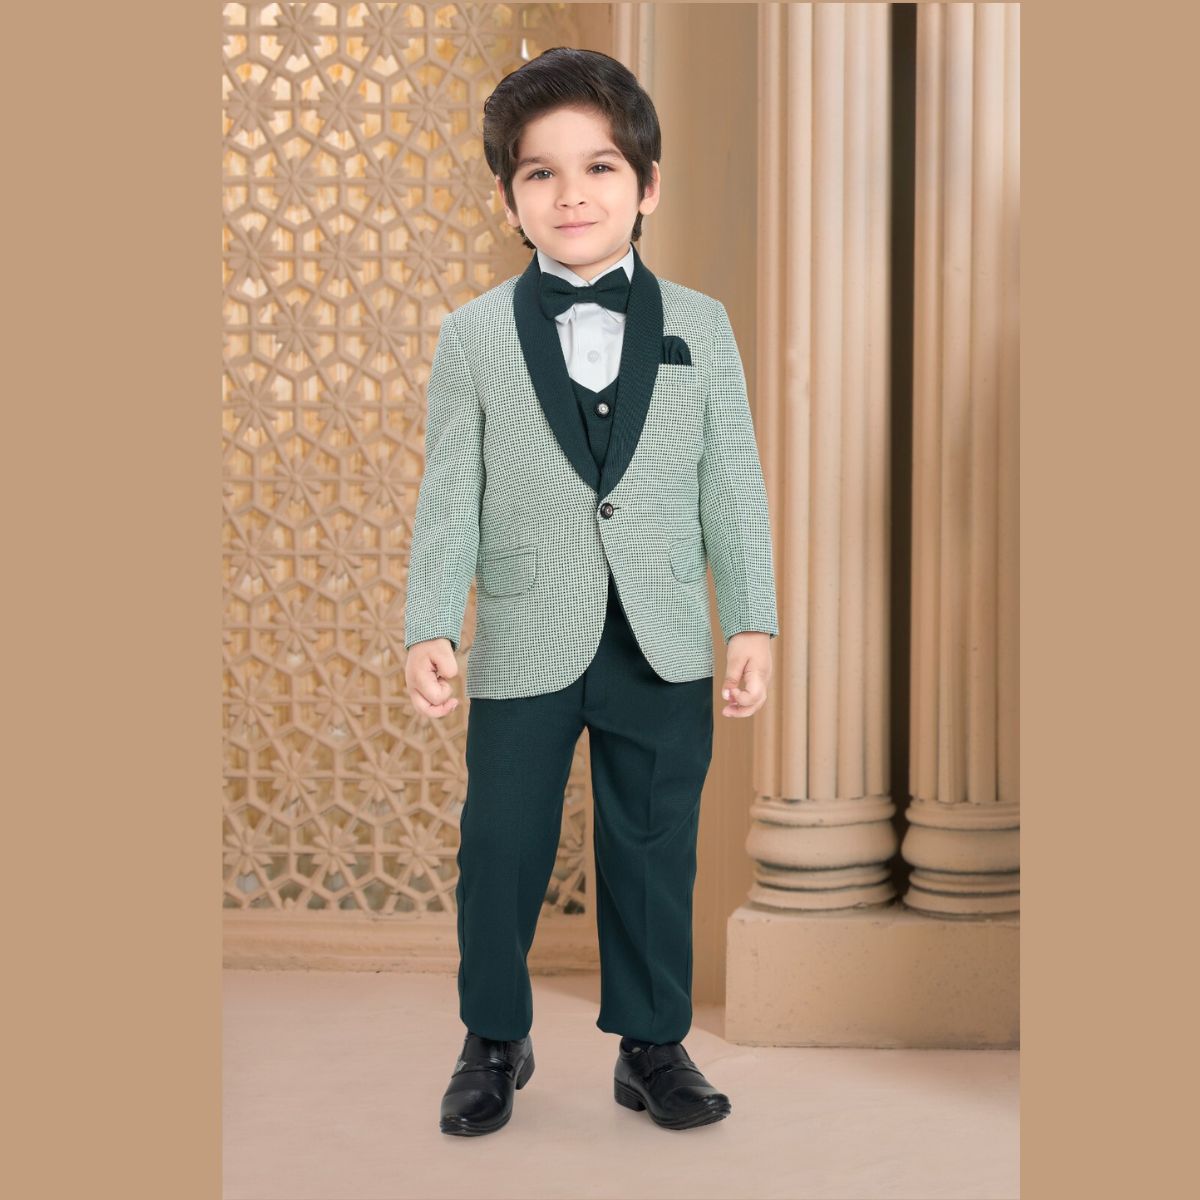 Boys' Shawl Tuxedo Suit in 9 Colors - Versatile and Stylish | Malcolm Royce